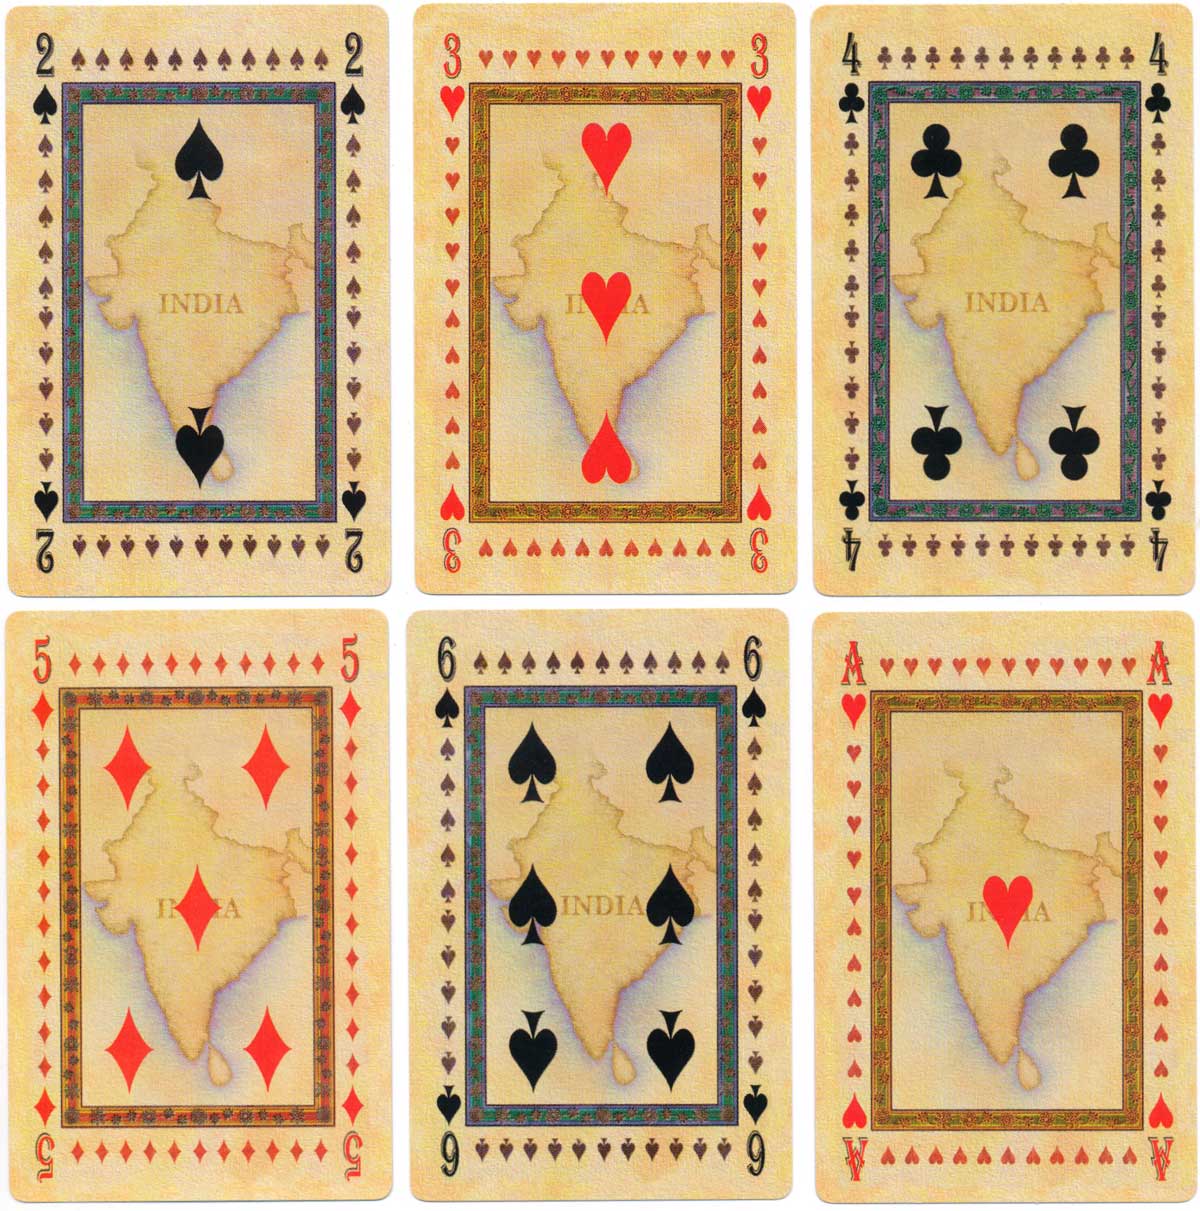 SiRen International playing cards based on traditional style of Indian miniature painting, 1998